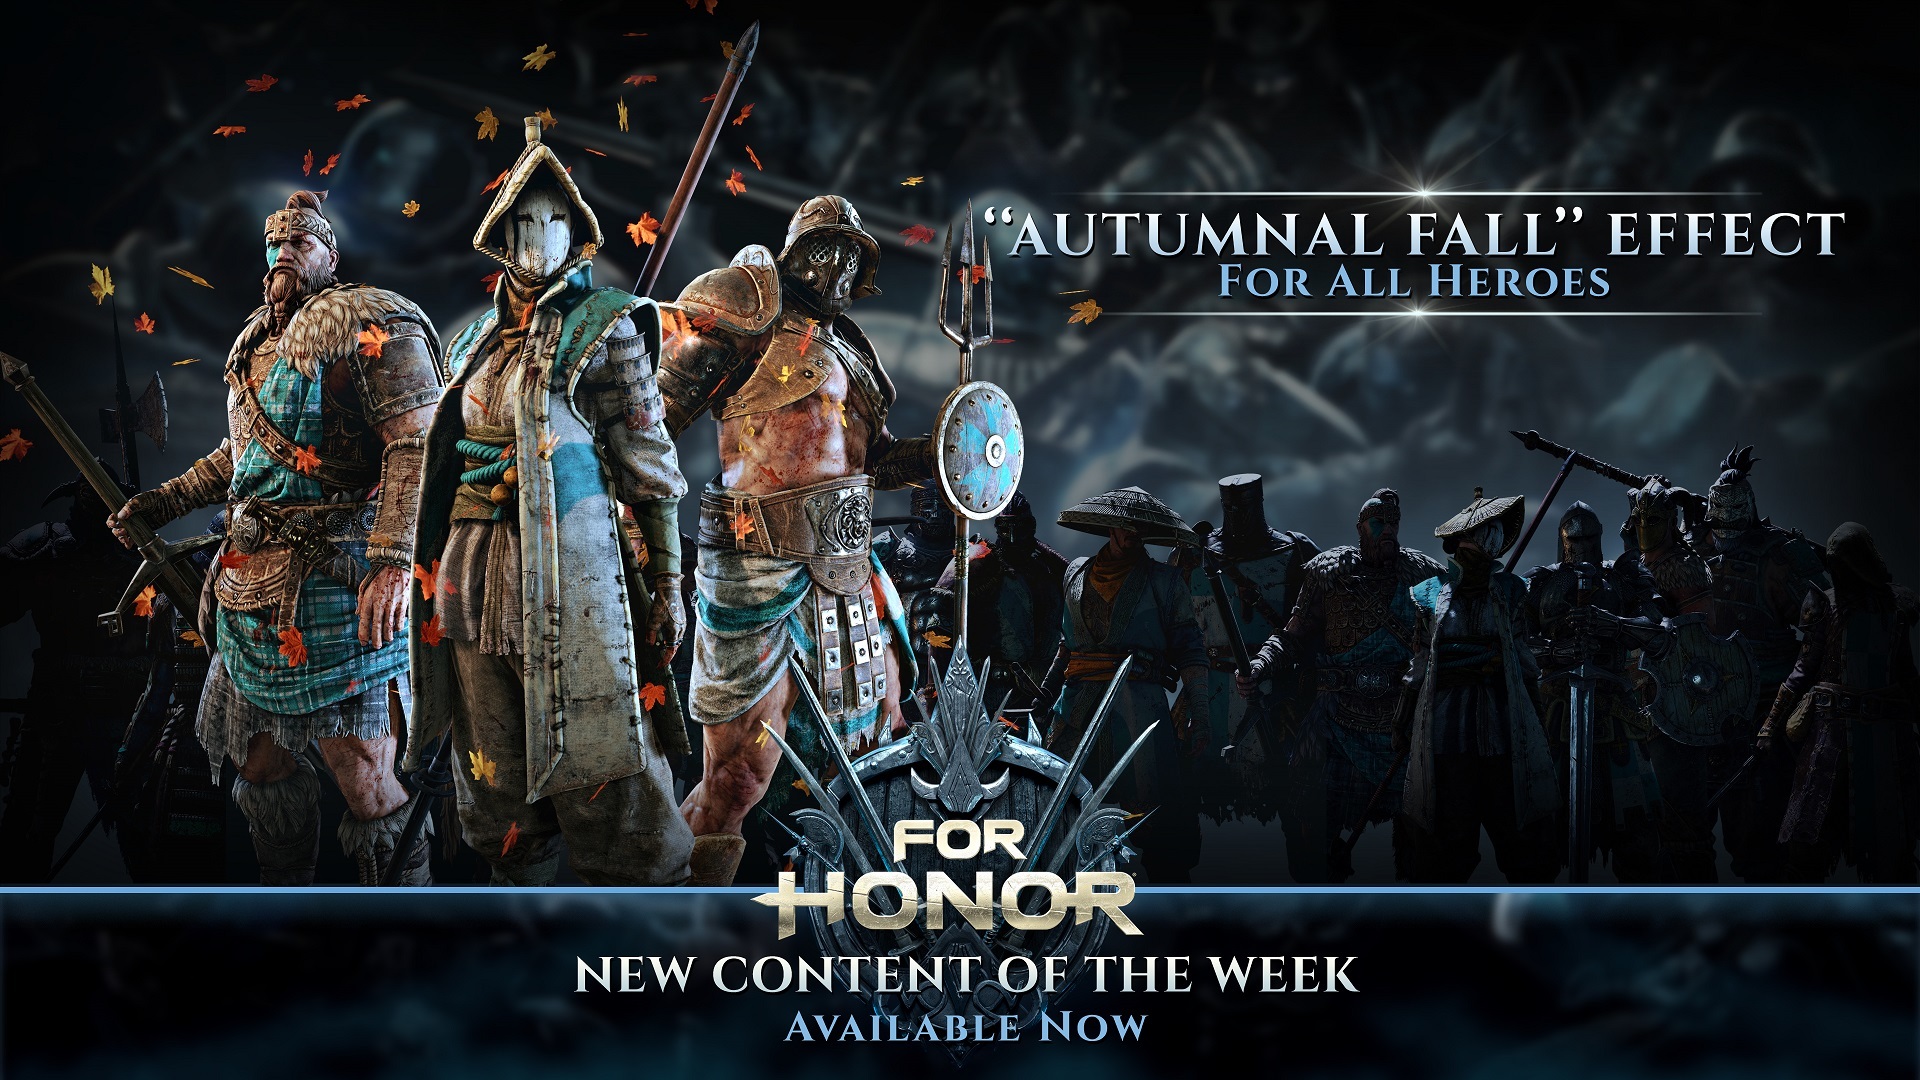 Steam For Honor For Honor New Content of the Week (September 27)